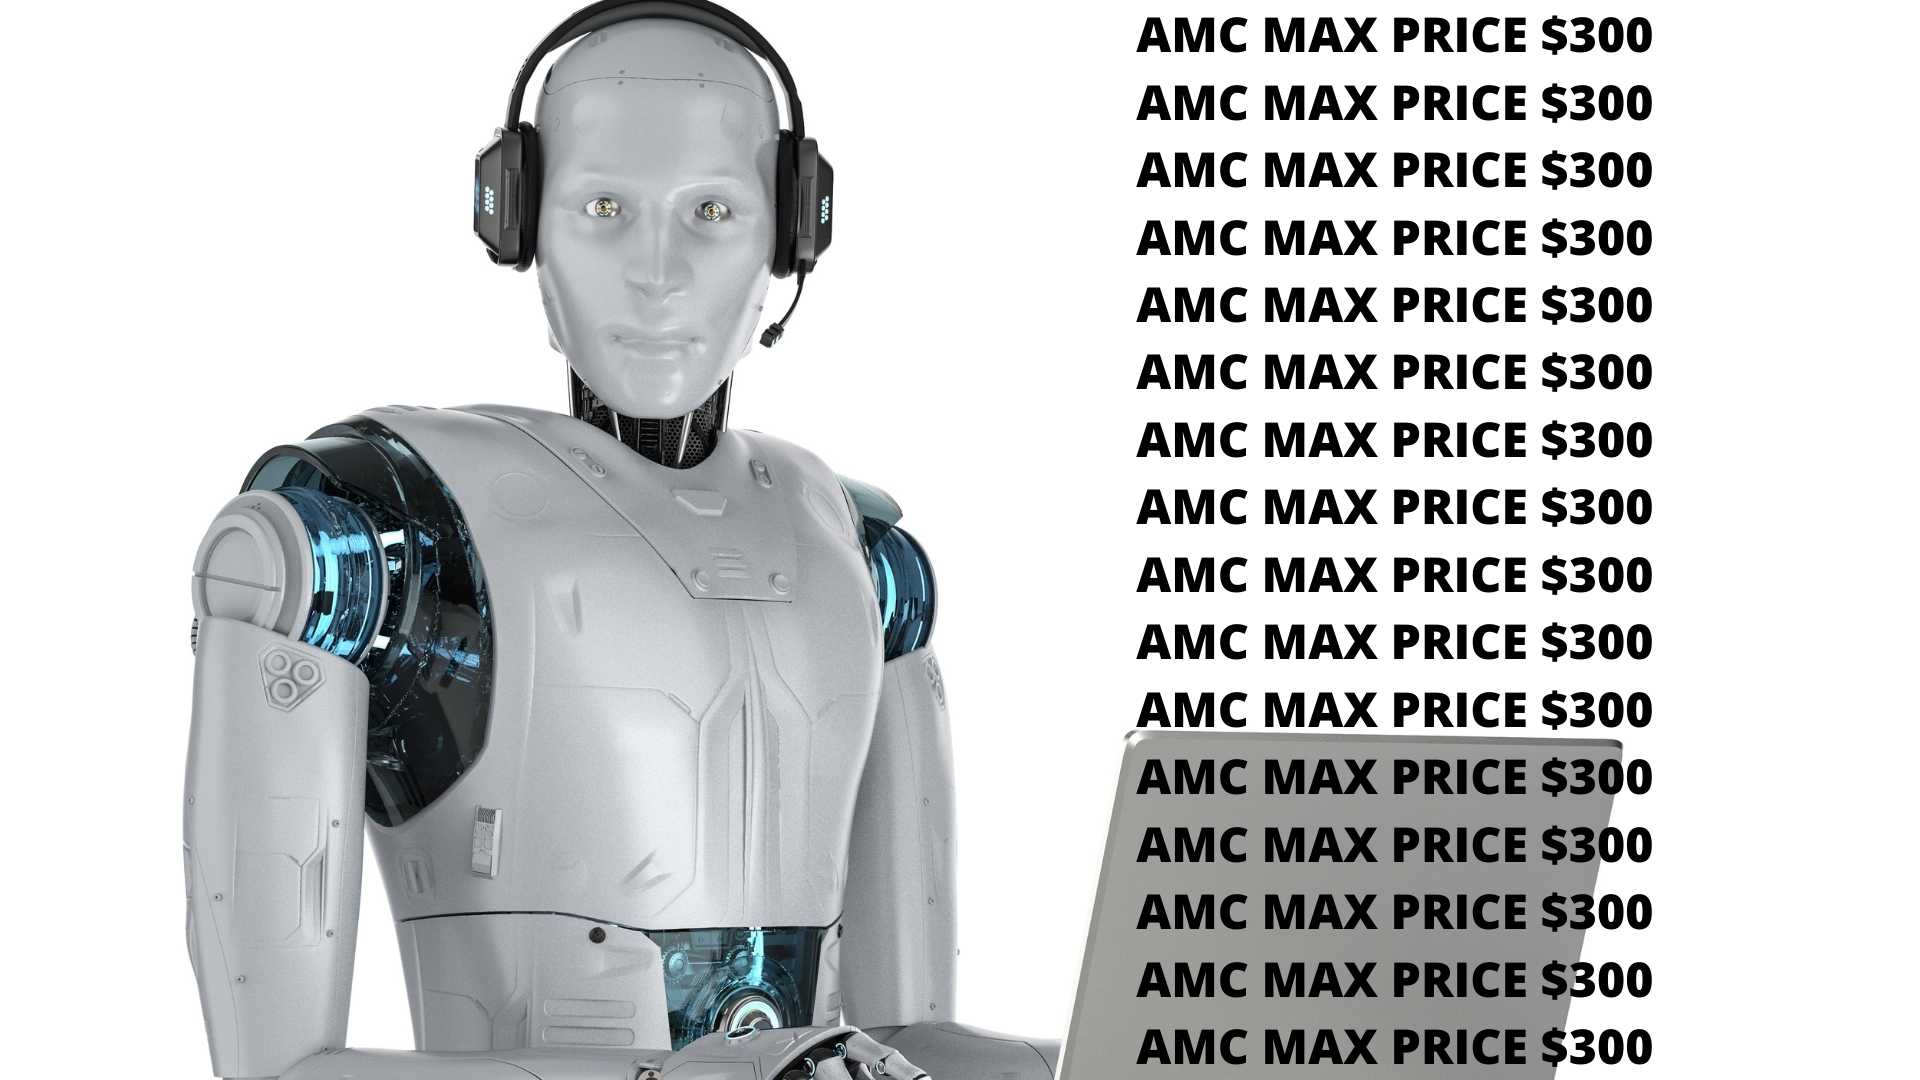 Bot accounts shilling AMC max price of $300, use dead people’s images, sick bastards.